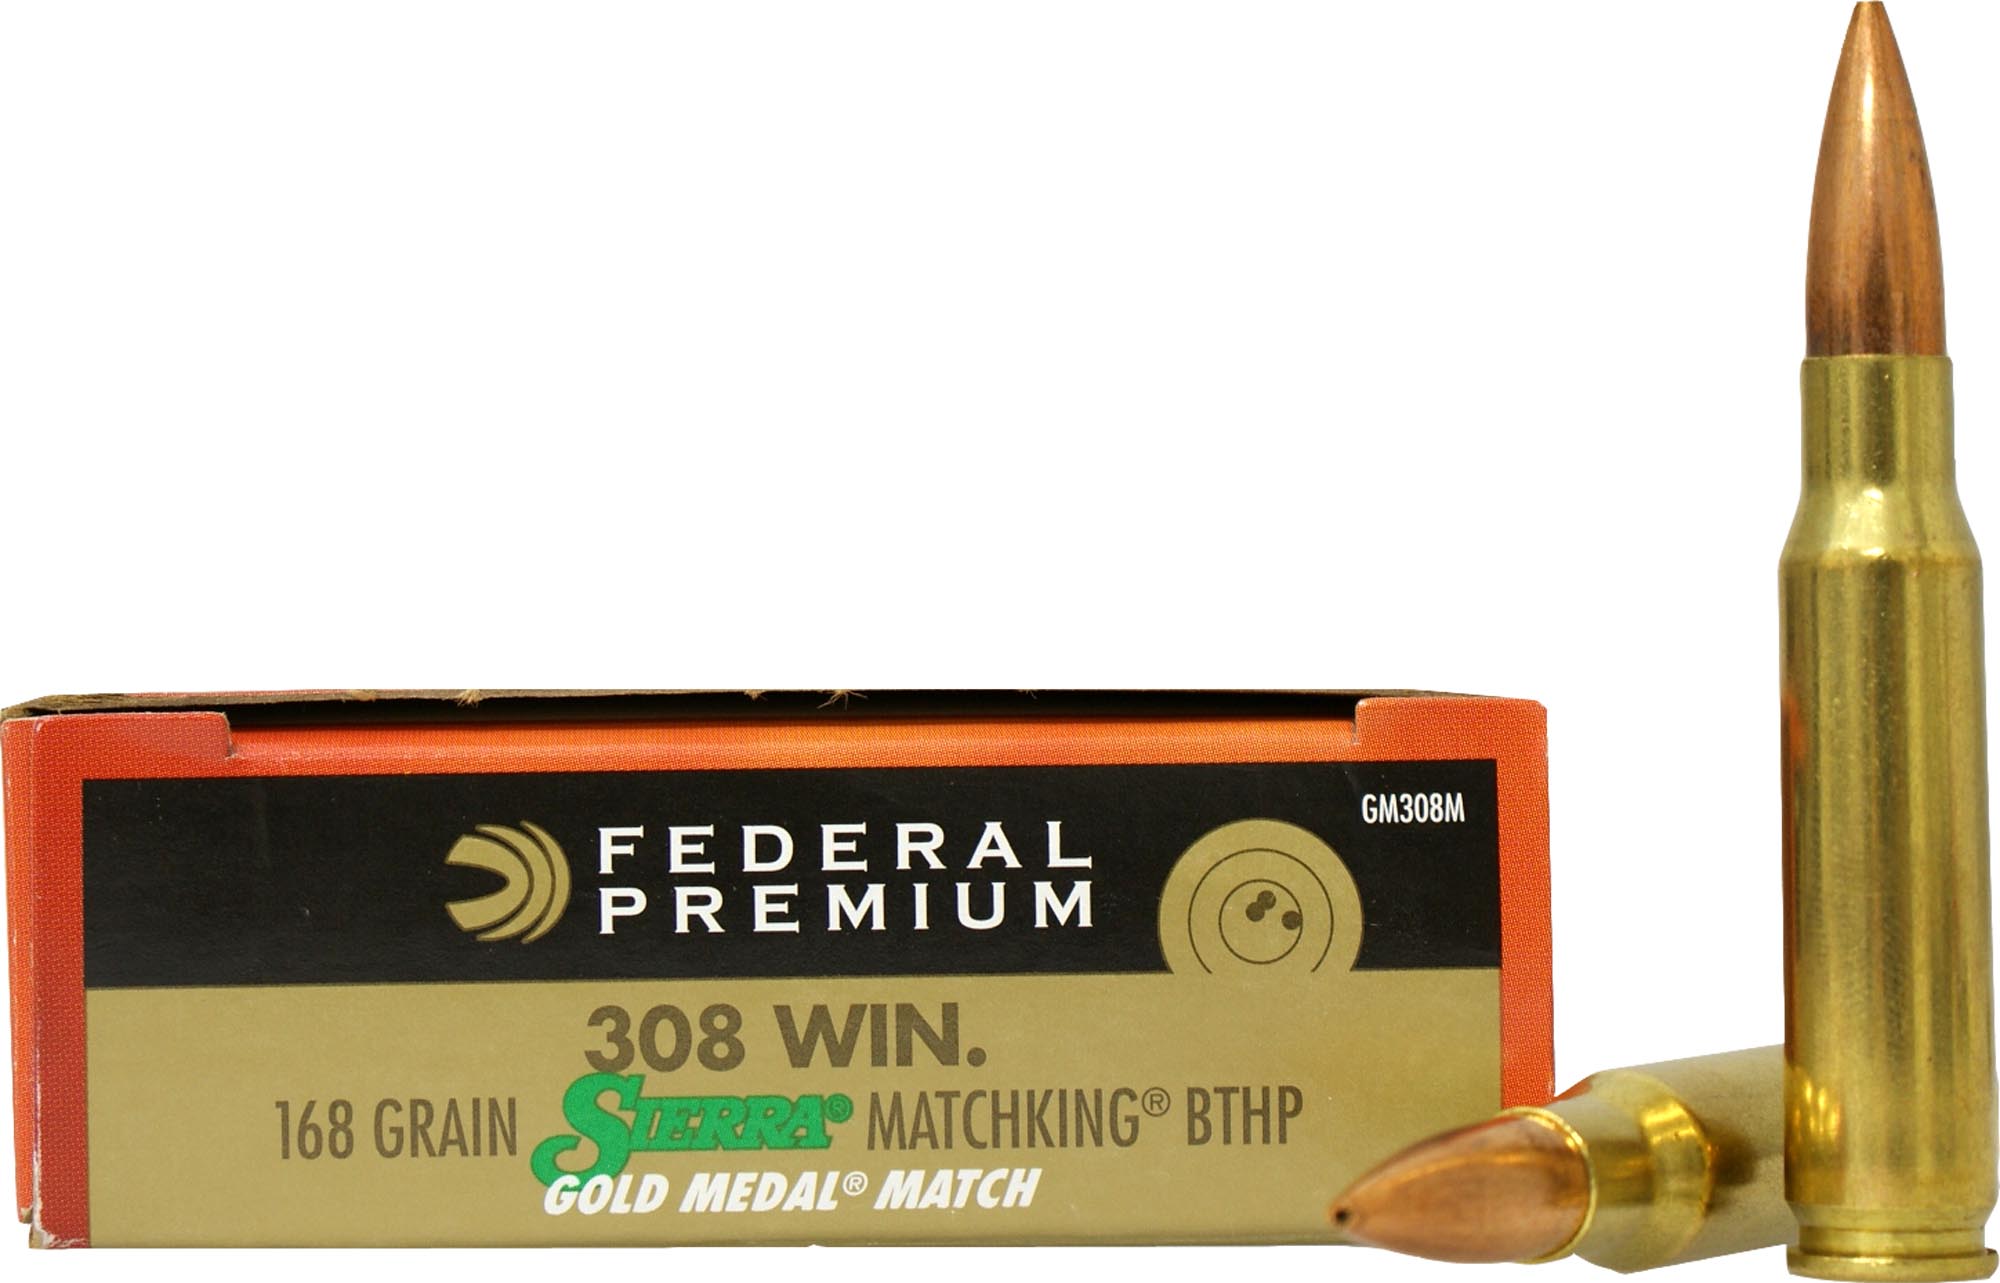 The rounds are primed with federal gold medal small rifle match primers (gm...